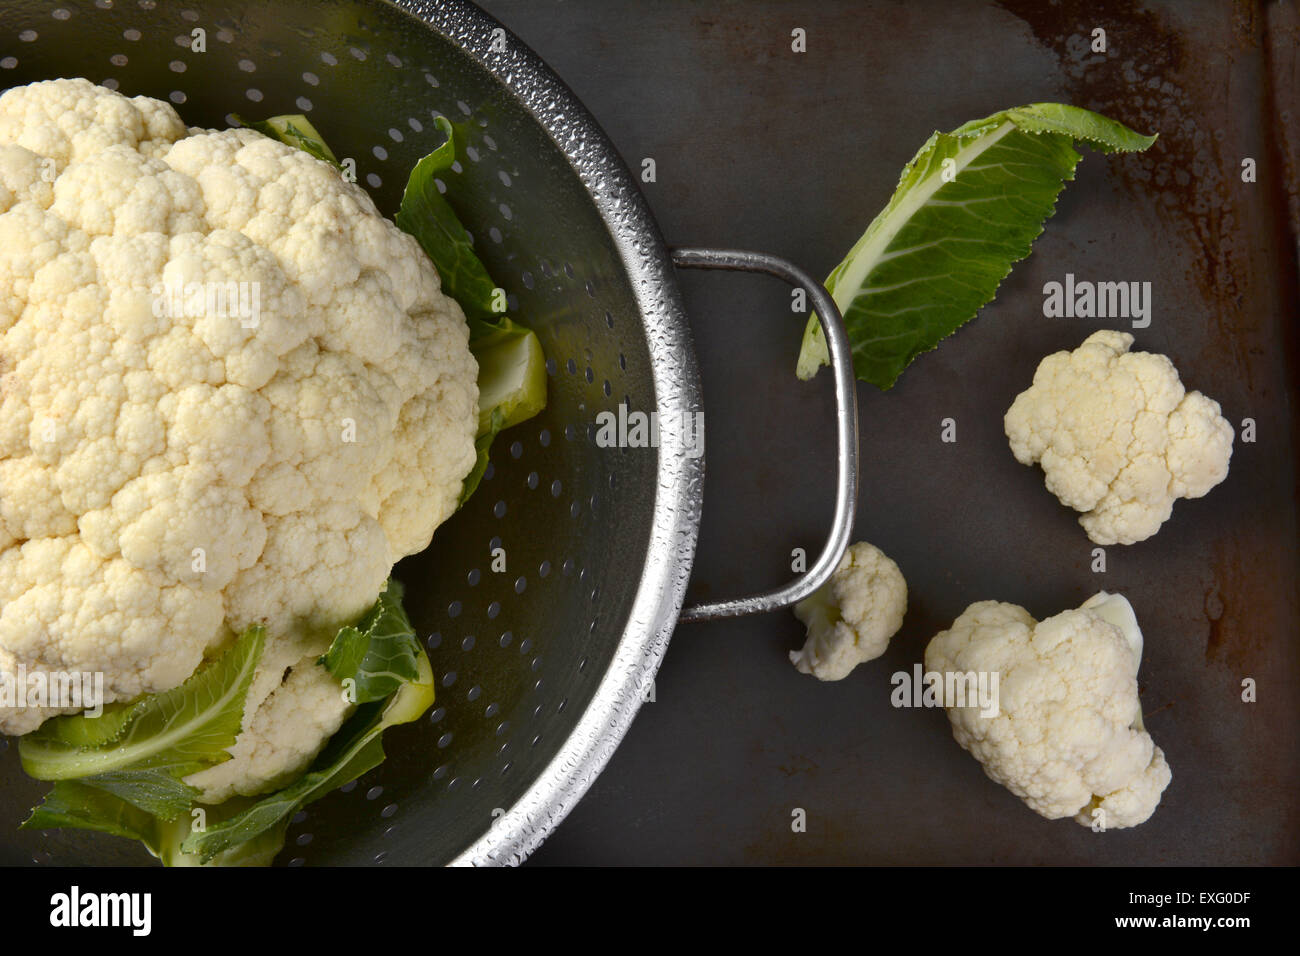 High angle closeup of a colander with a head of cauliflower. On the surface outside are a couple florets and a leaf. Stock Photo